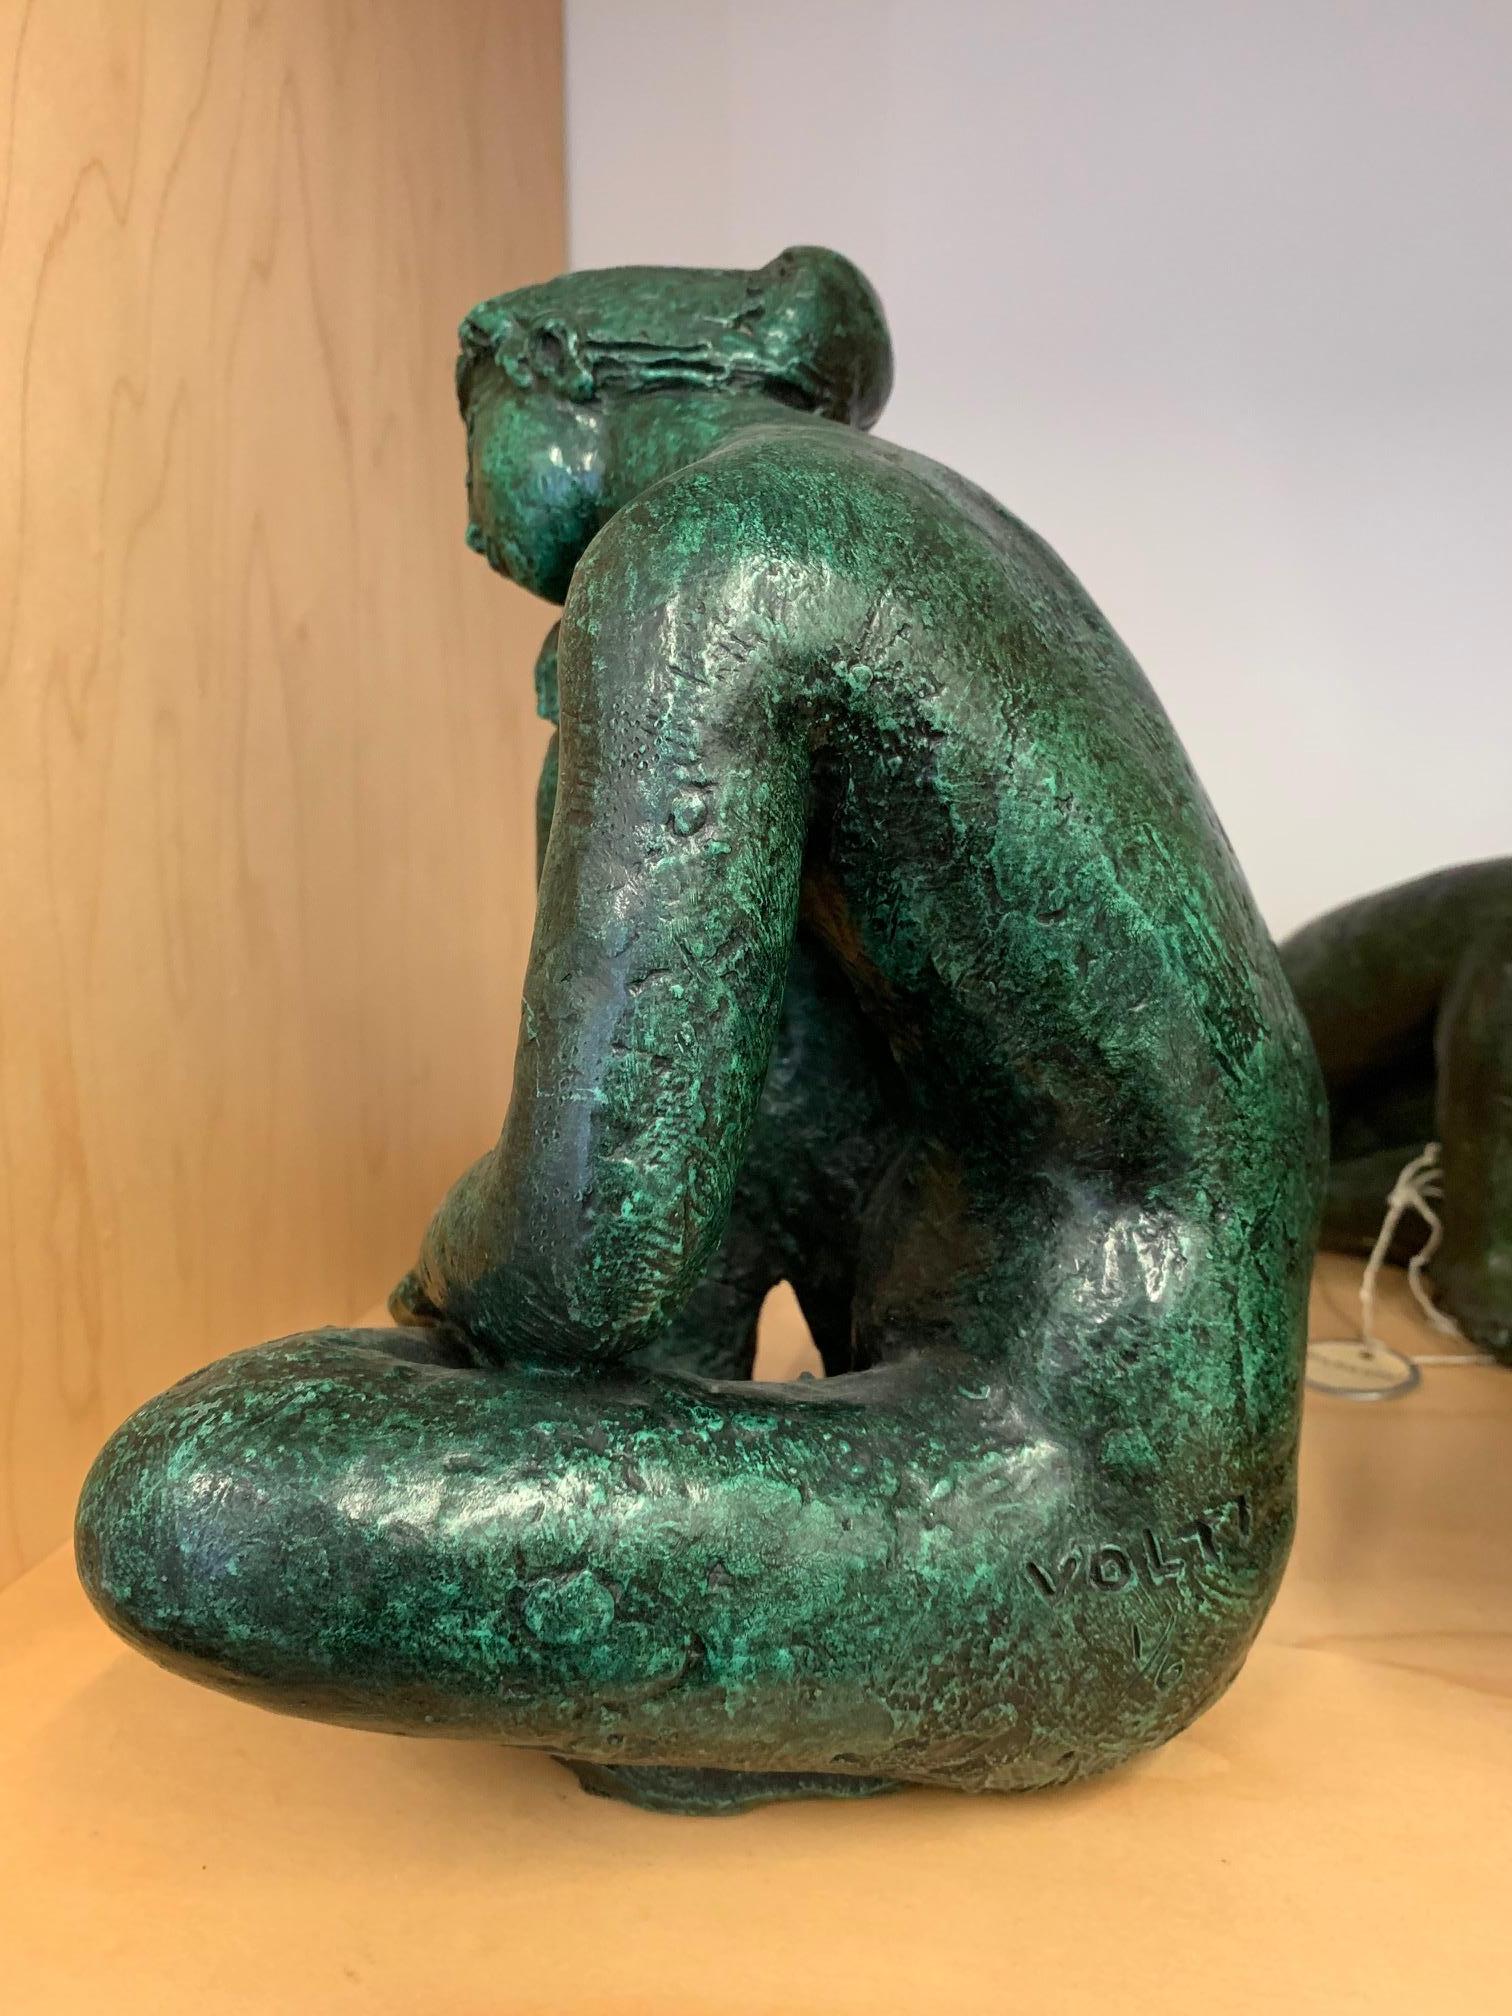 This small, bronze, female figurative sculpture by Antoniucci Volti has a beautiful green patina on it and is an edition 1 of 6. 

Antoniucci Volti, from his real name Voltigero, was a French sculptor, draftsman and engraver of Italian origins, born